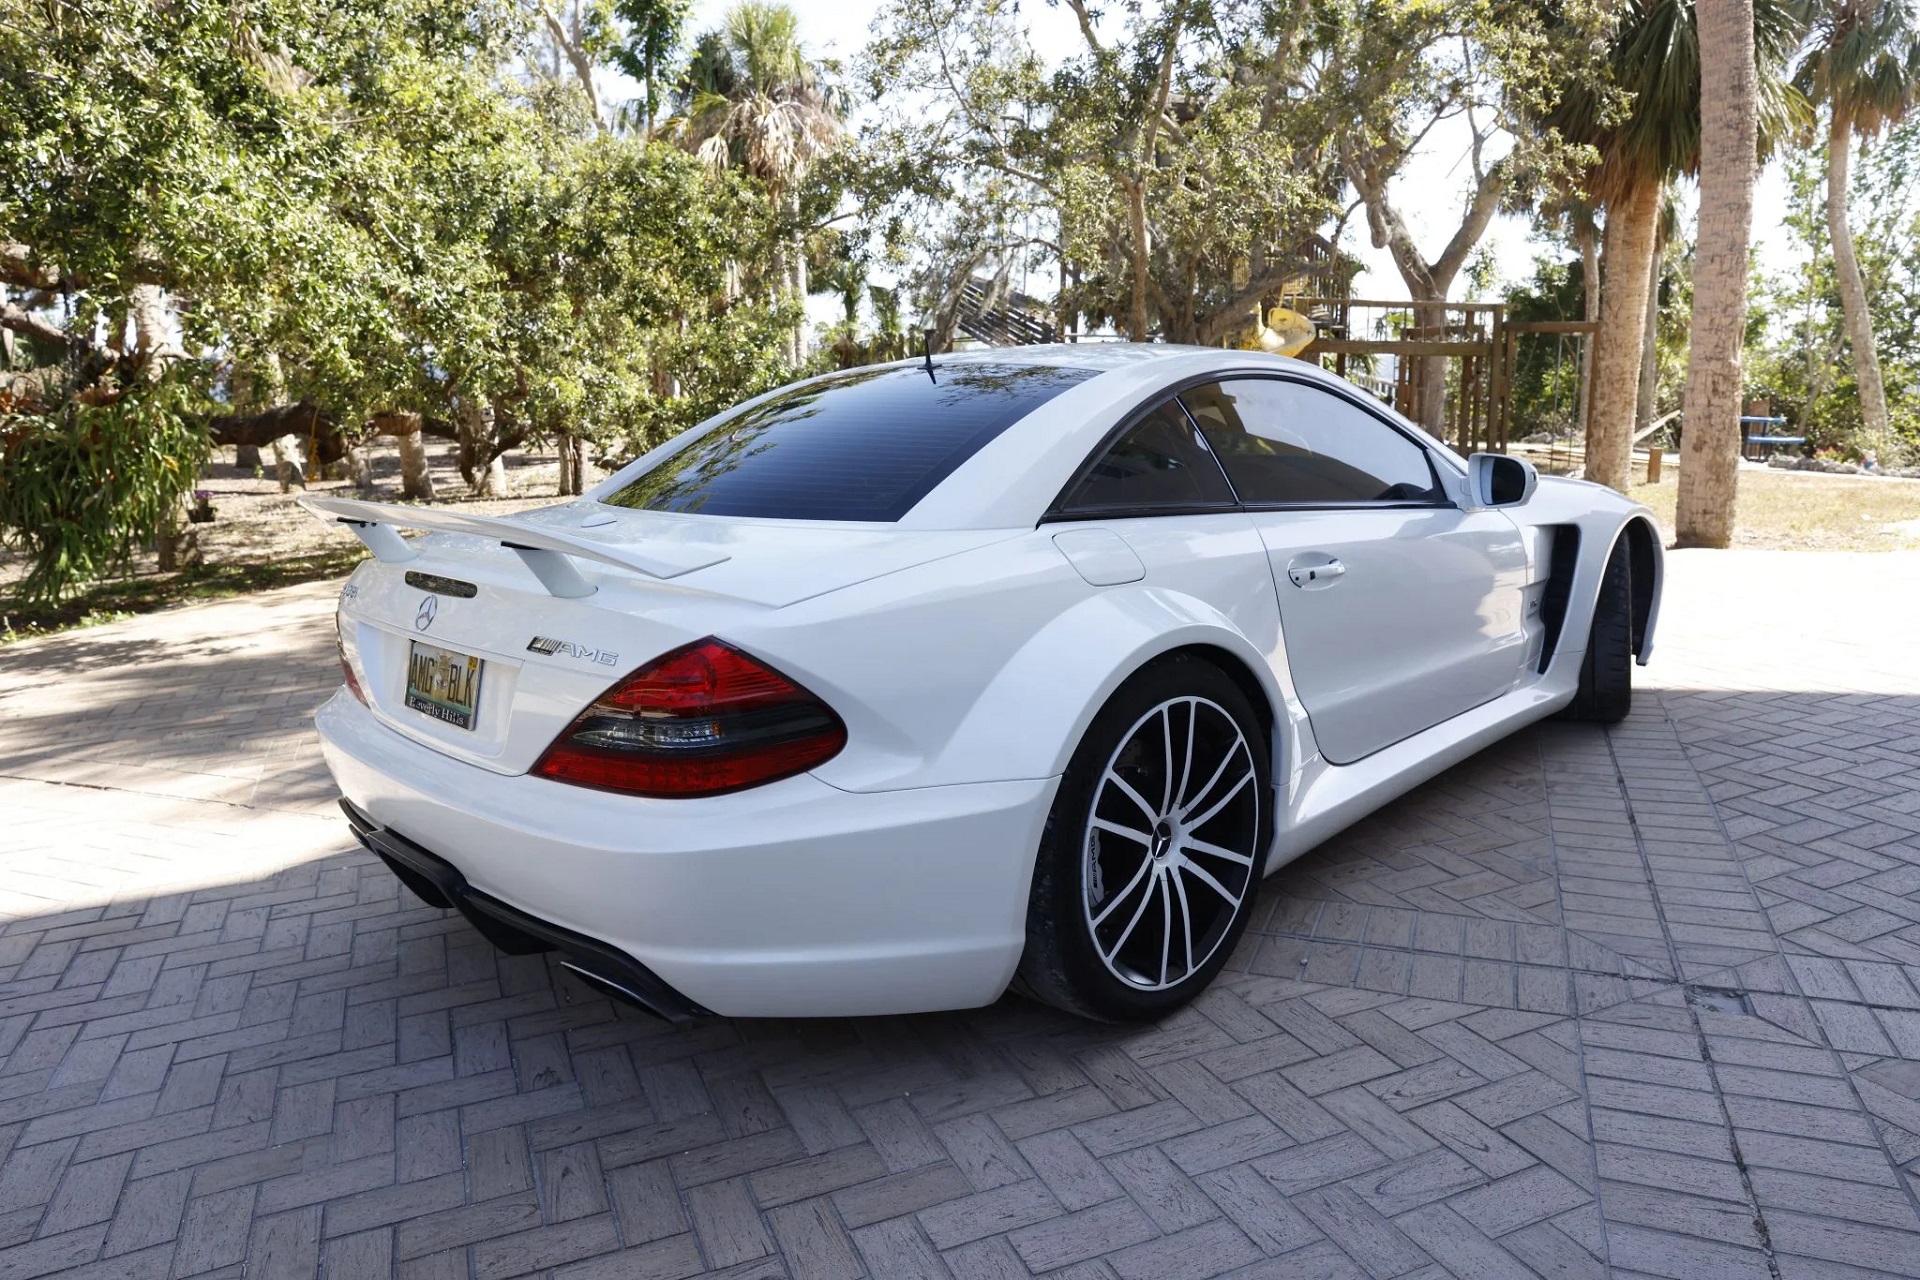 rear-angled-profile of a white 2009 mercedes benz sl65 amg black series